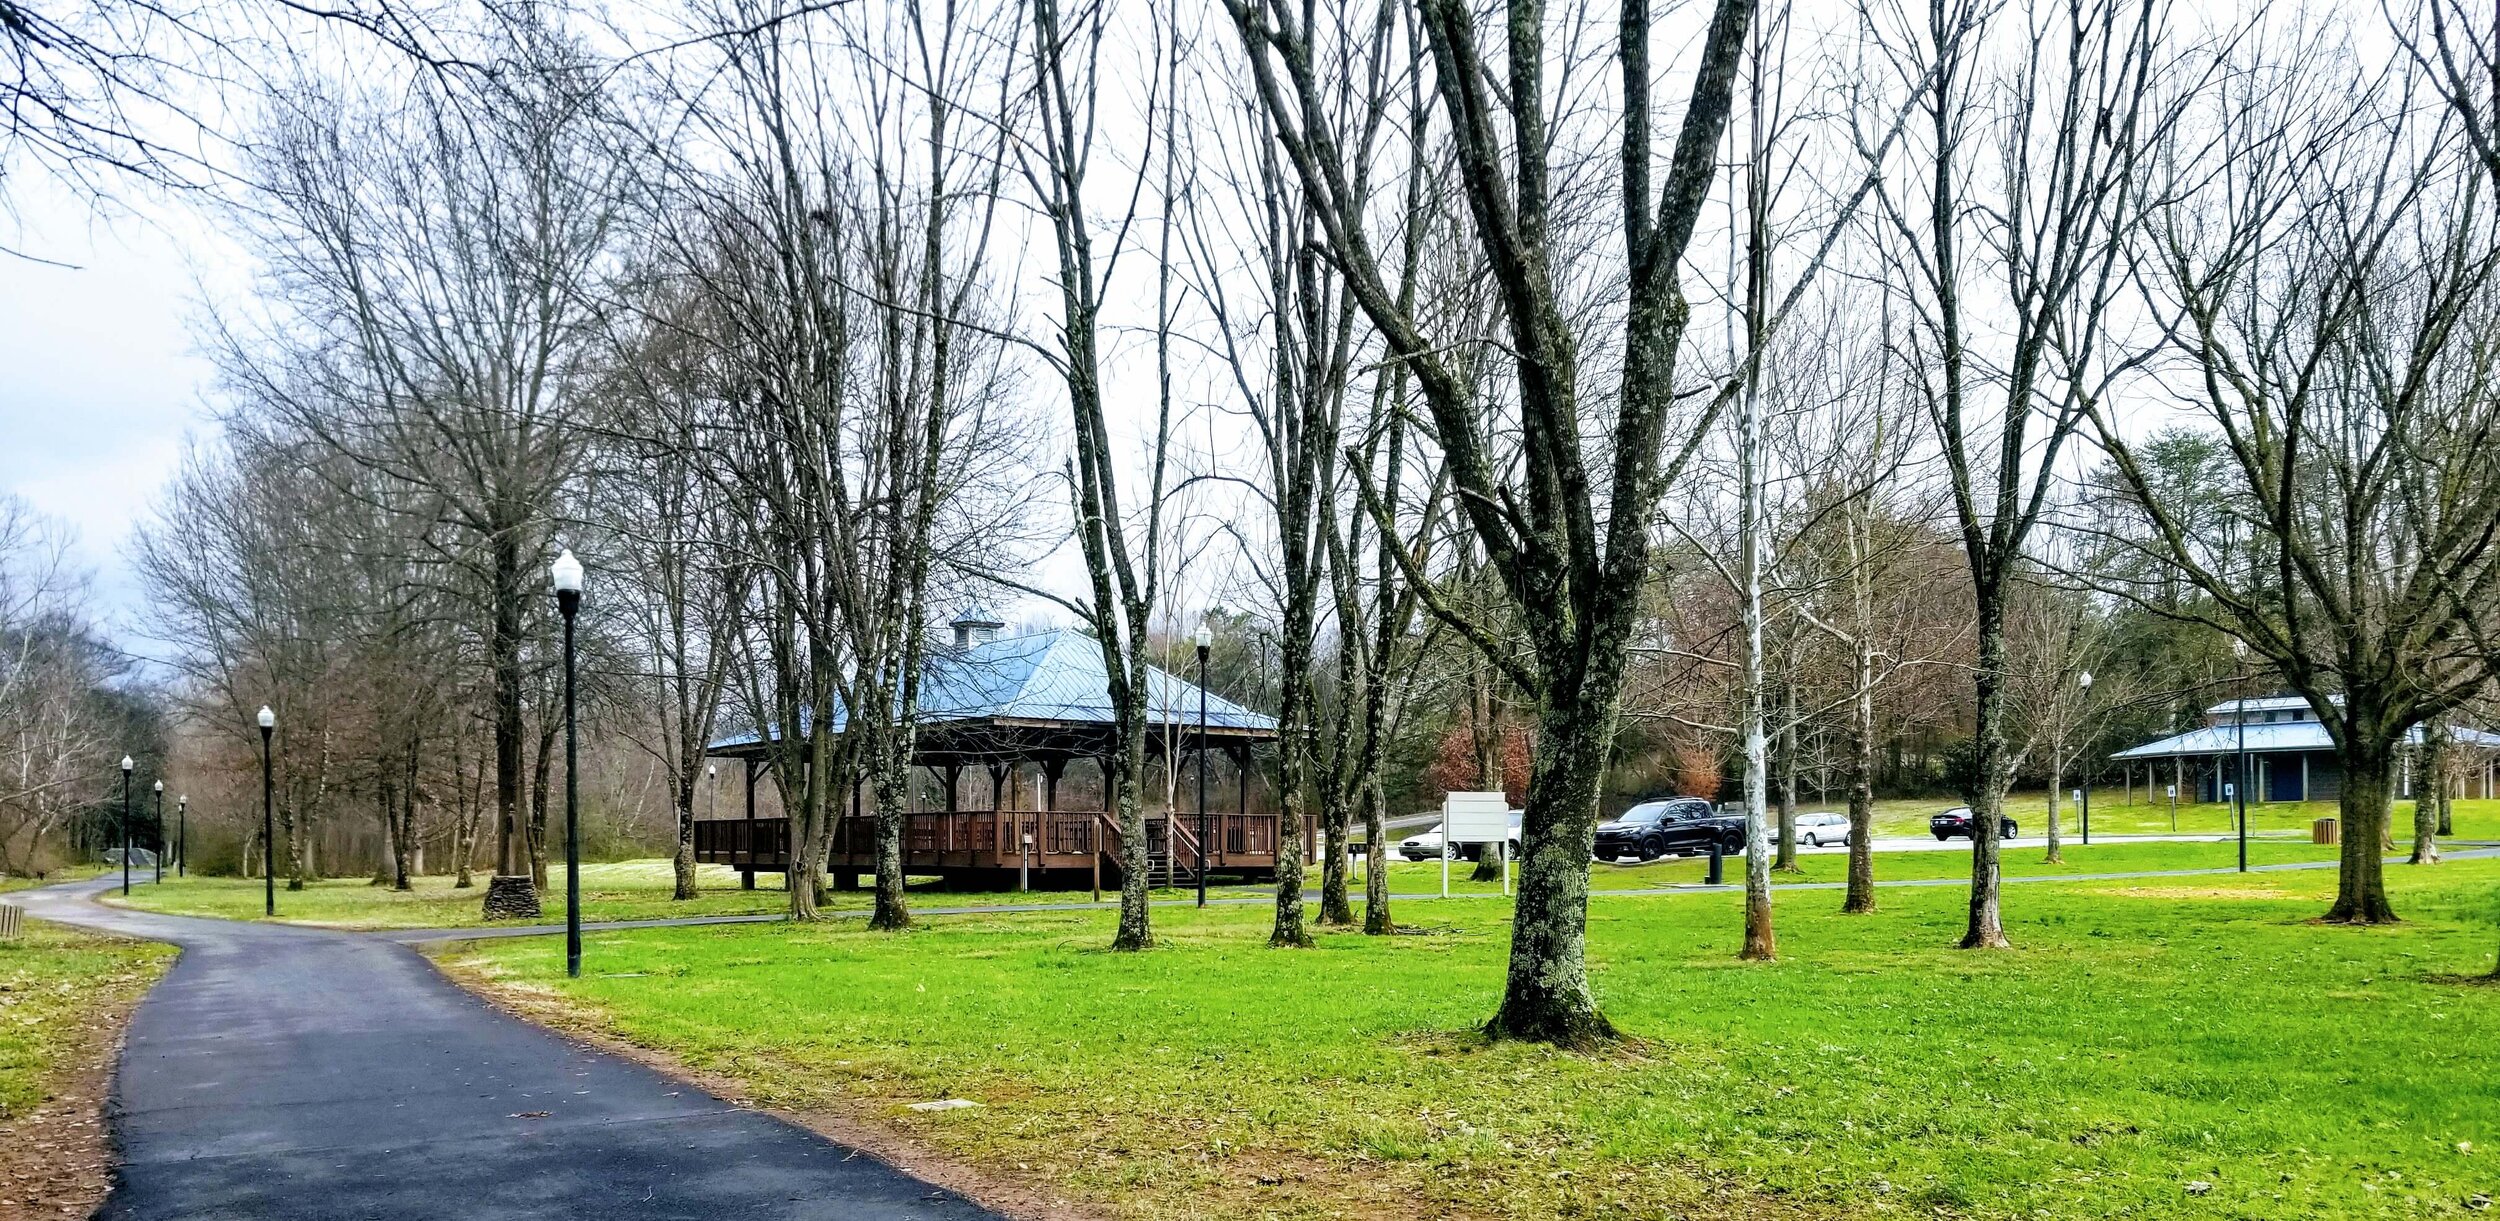 Picnic pavilion and bathrooms in Pearson Springs Park